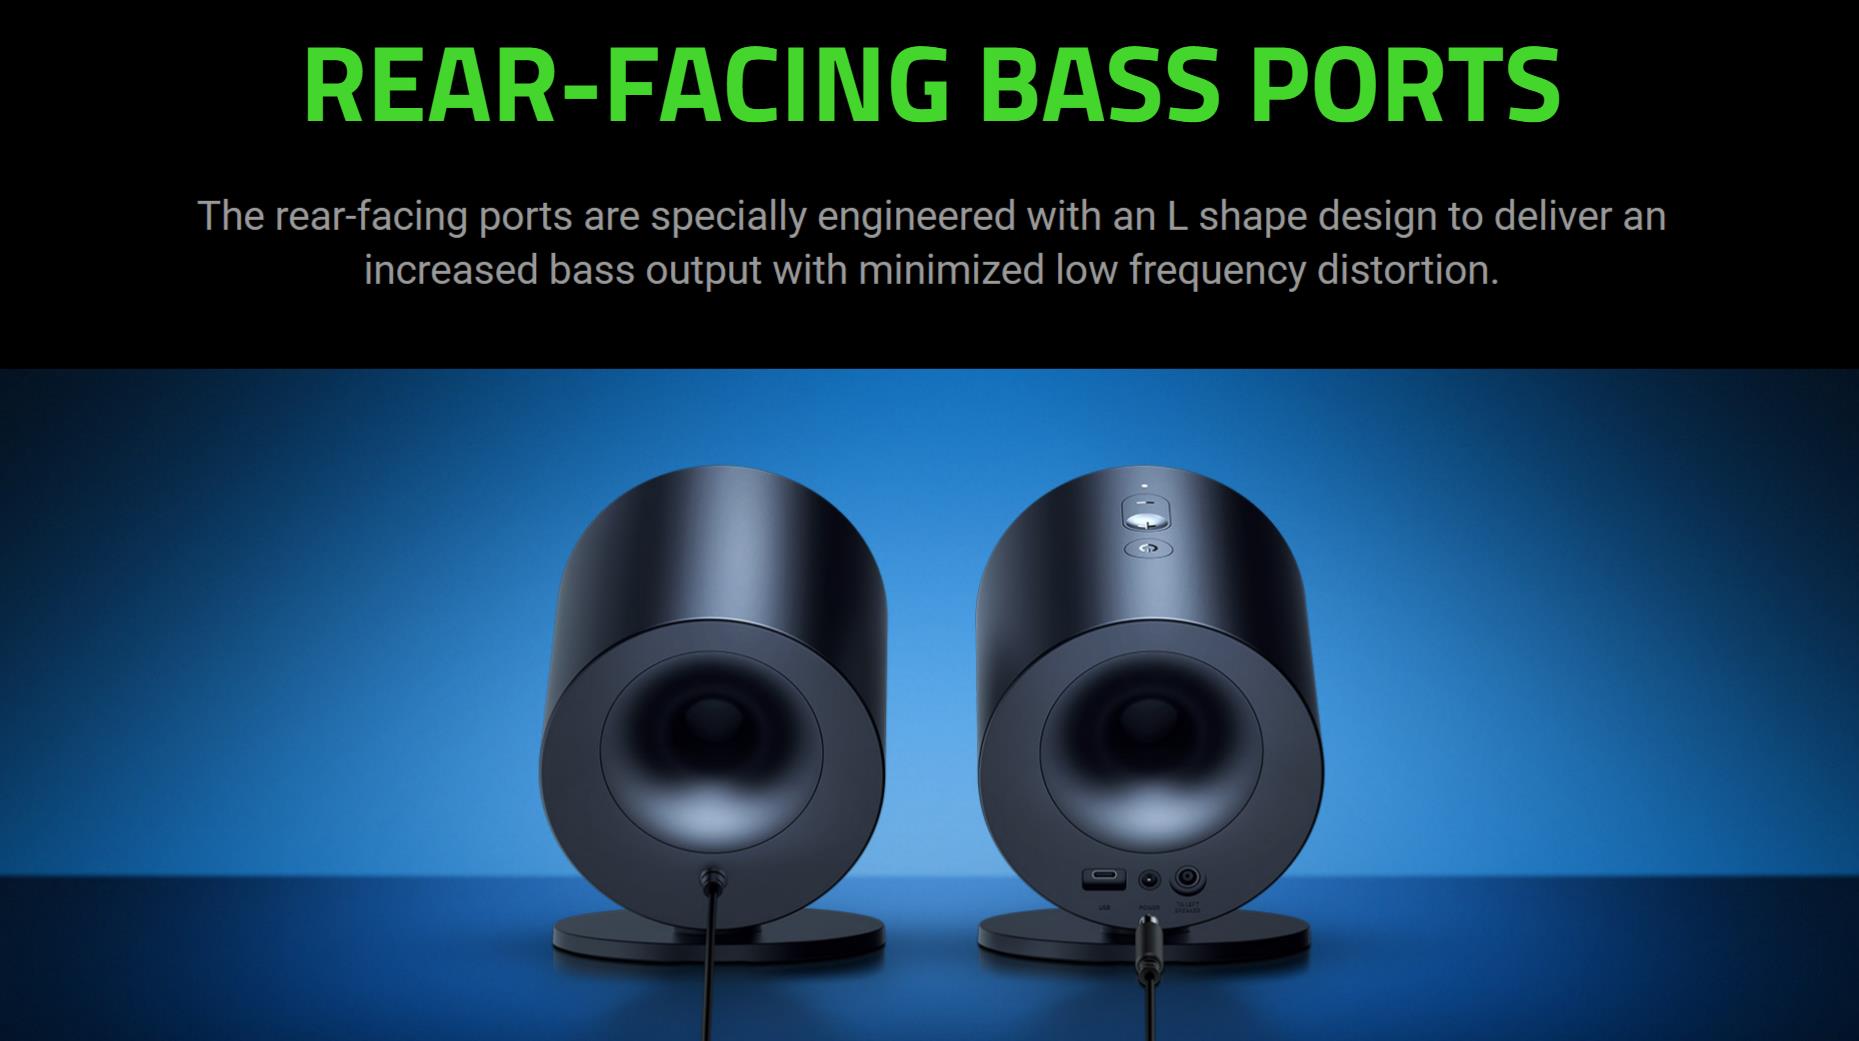 A large marketing image providing additional information about the product Razer Nommo V2 X - Full-Range 2.0 PC Gaming Speakers  - Additional alt info not provided